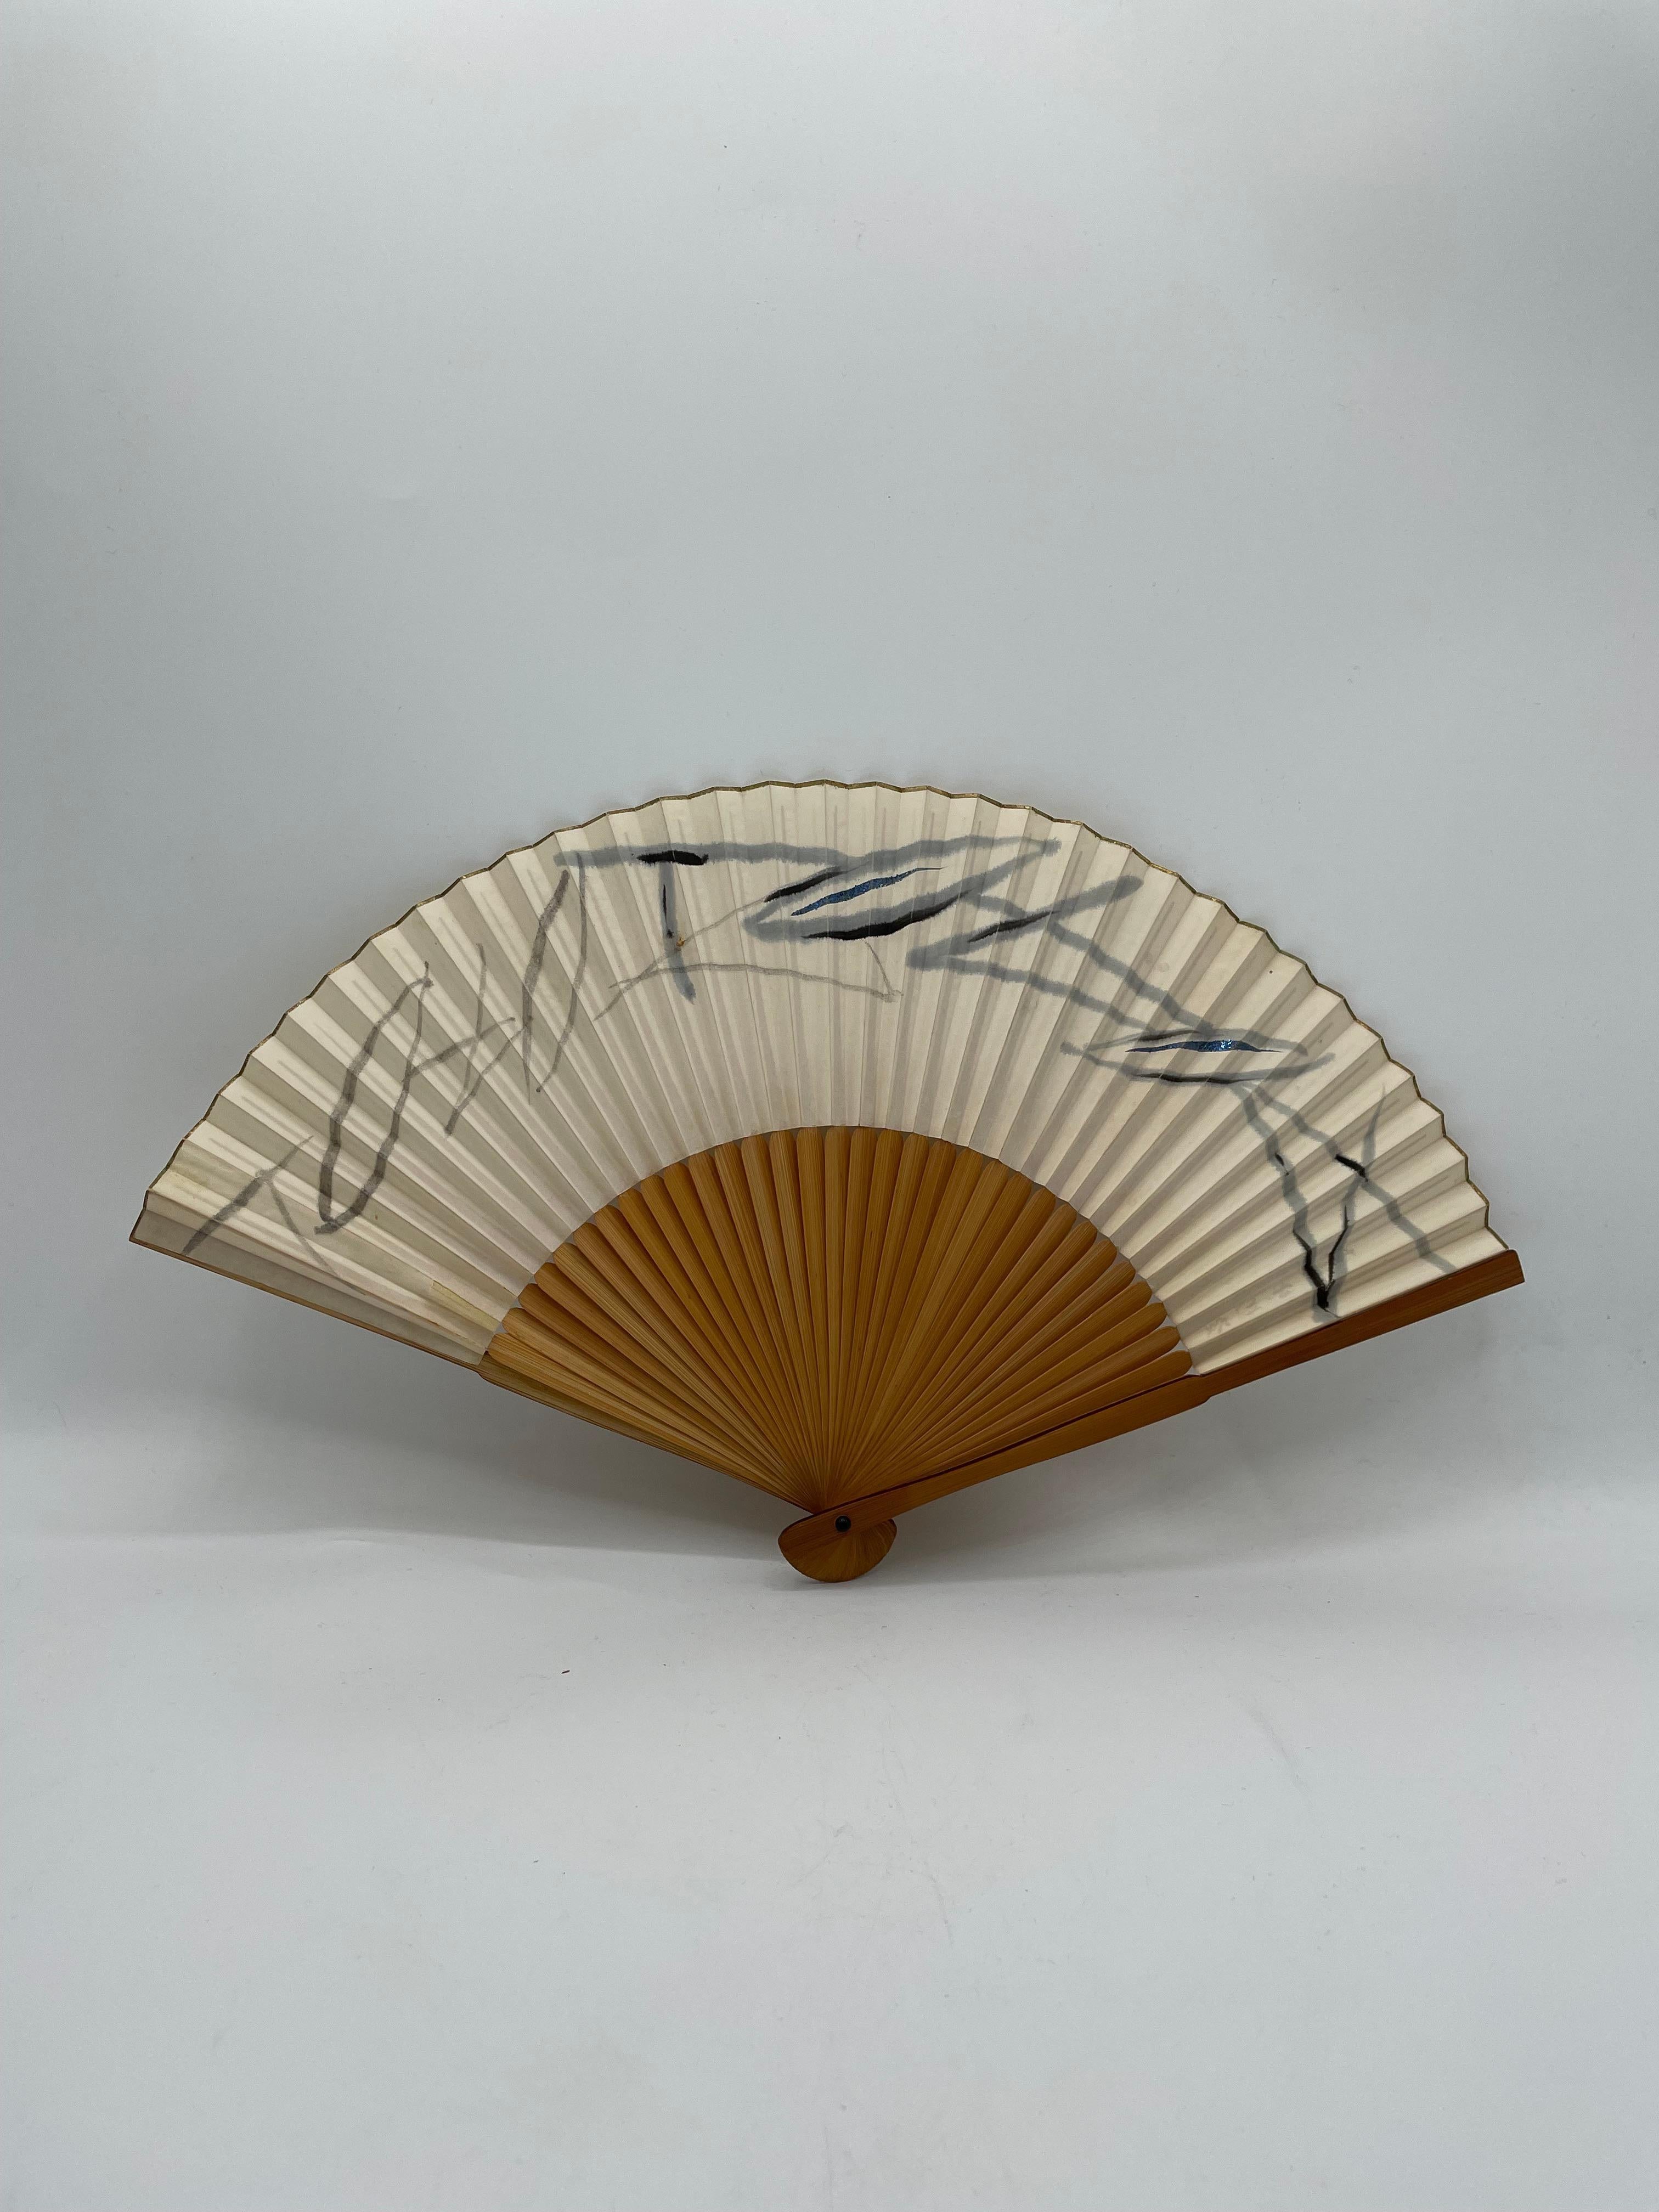 This is a fan which was made in Japan around 1980s in Showa era.
This is made with a paper and bamboos. 

This fan has a lot of stains. 

Japanese fans are made of paper on a bamboo frame, usually with a design painted on them. In addition to